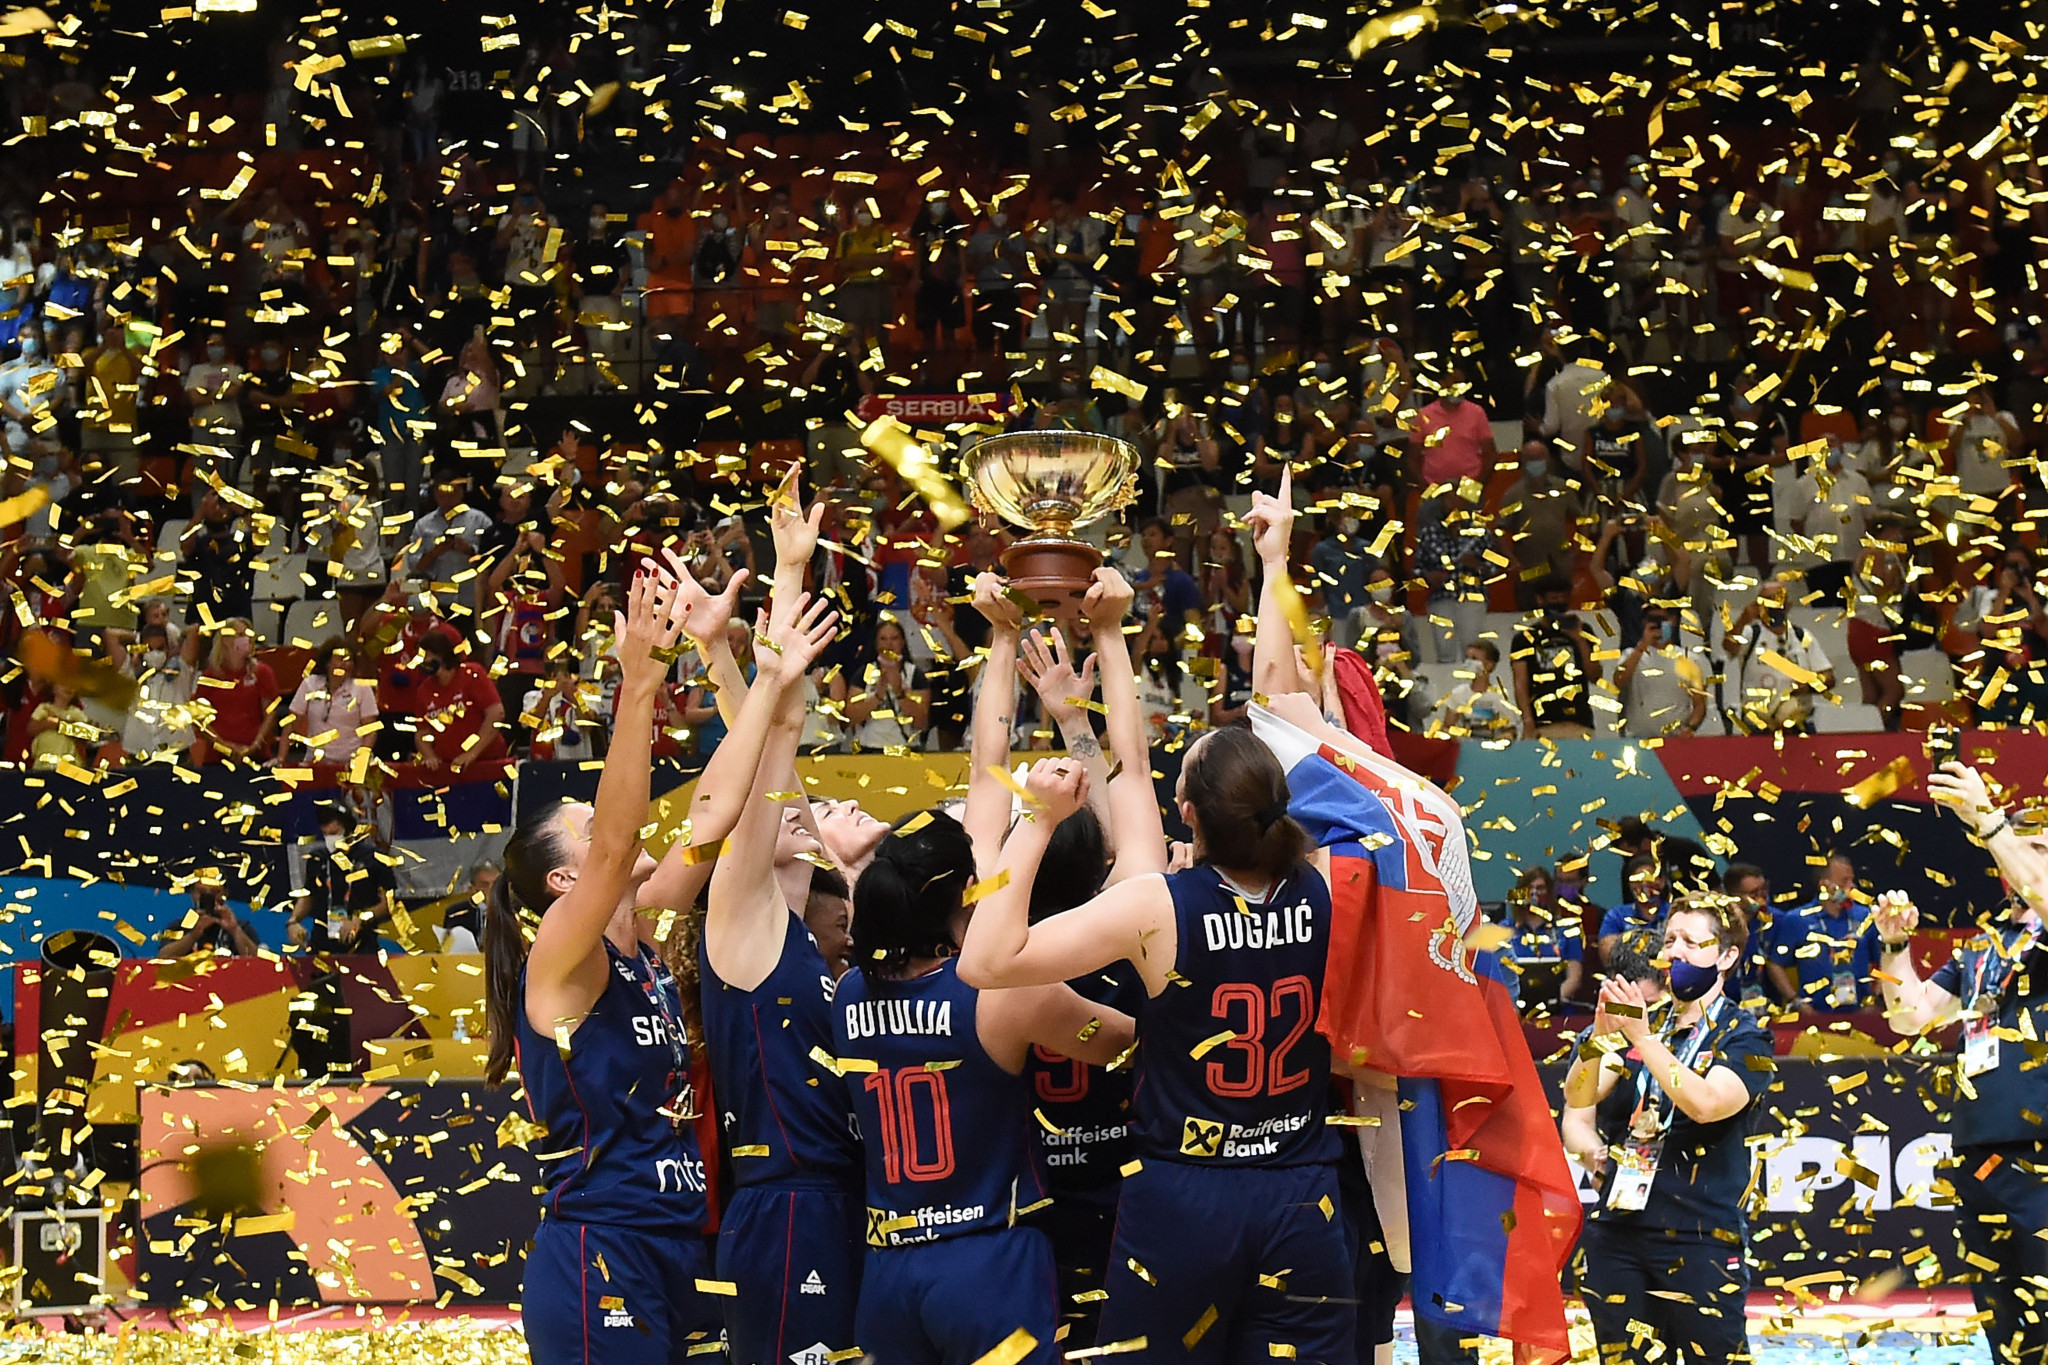 Serbia's women's basketball team won a second EuroBasket title last year ©Getty Images